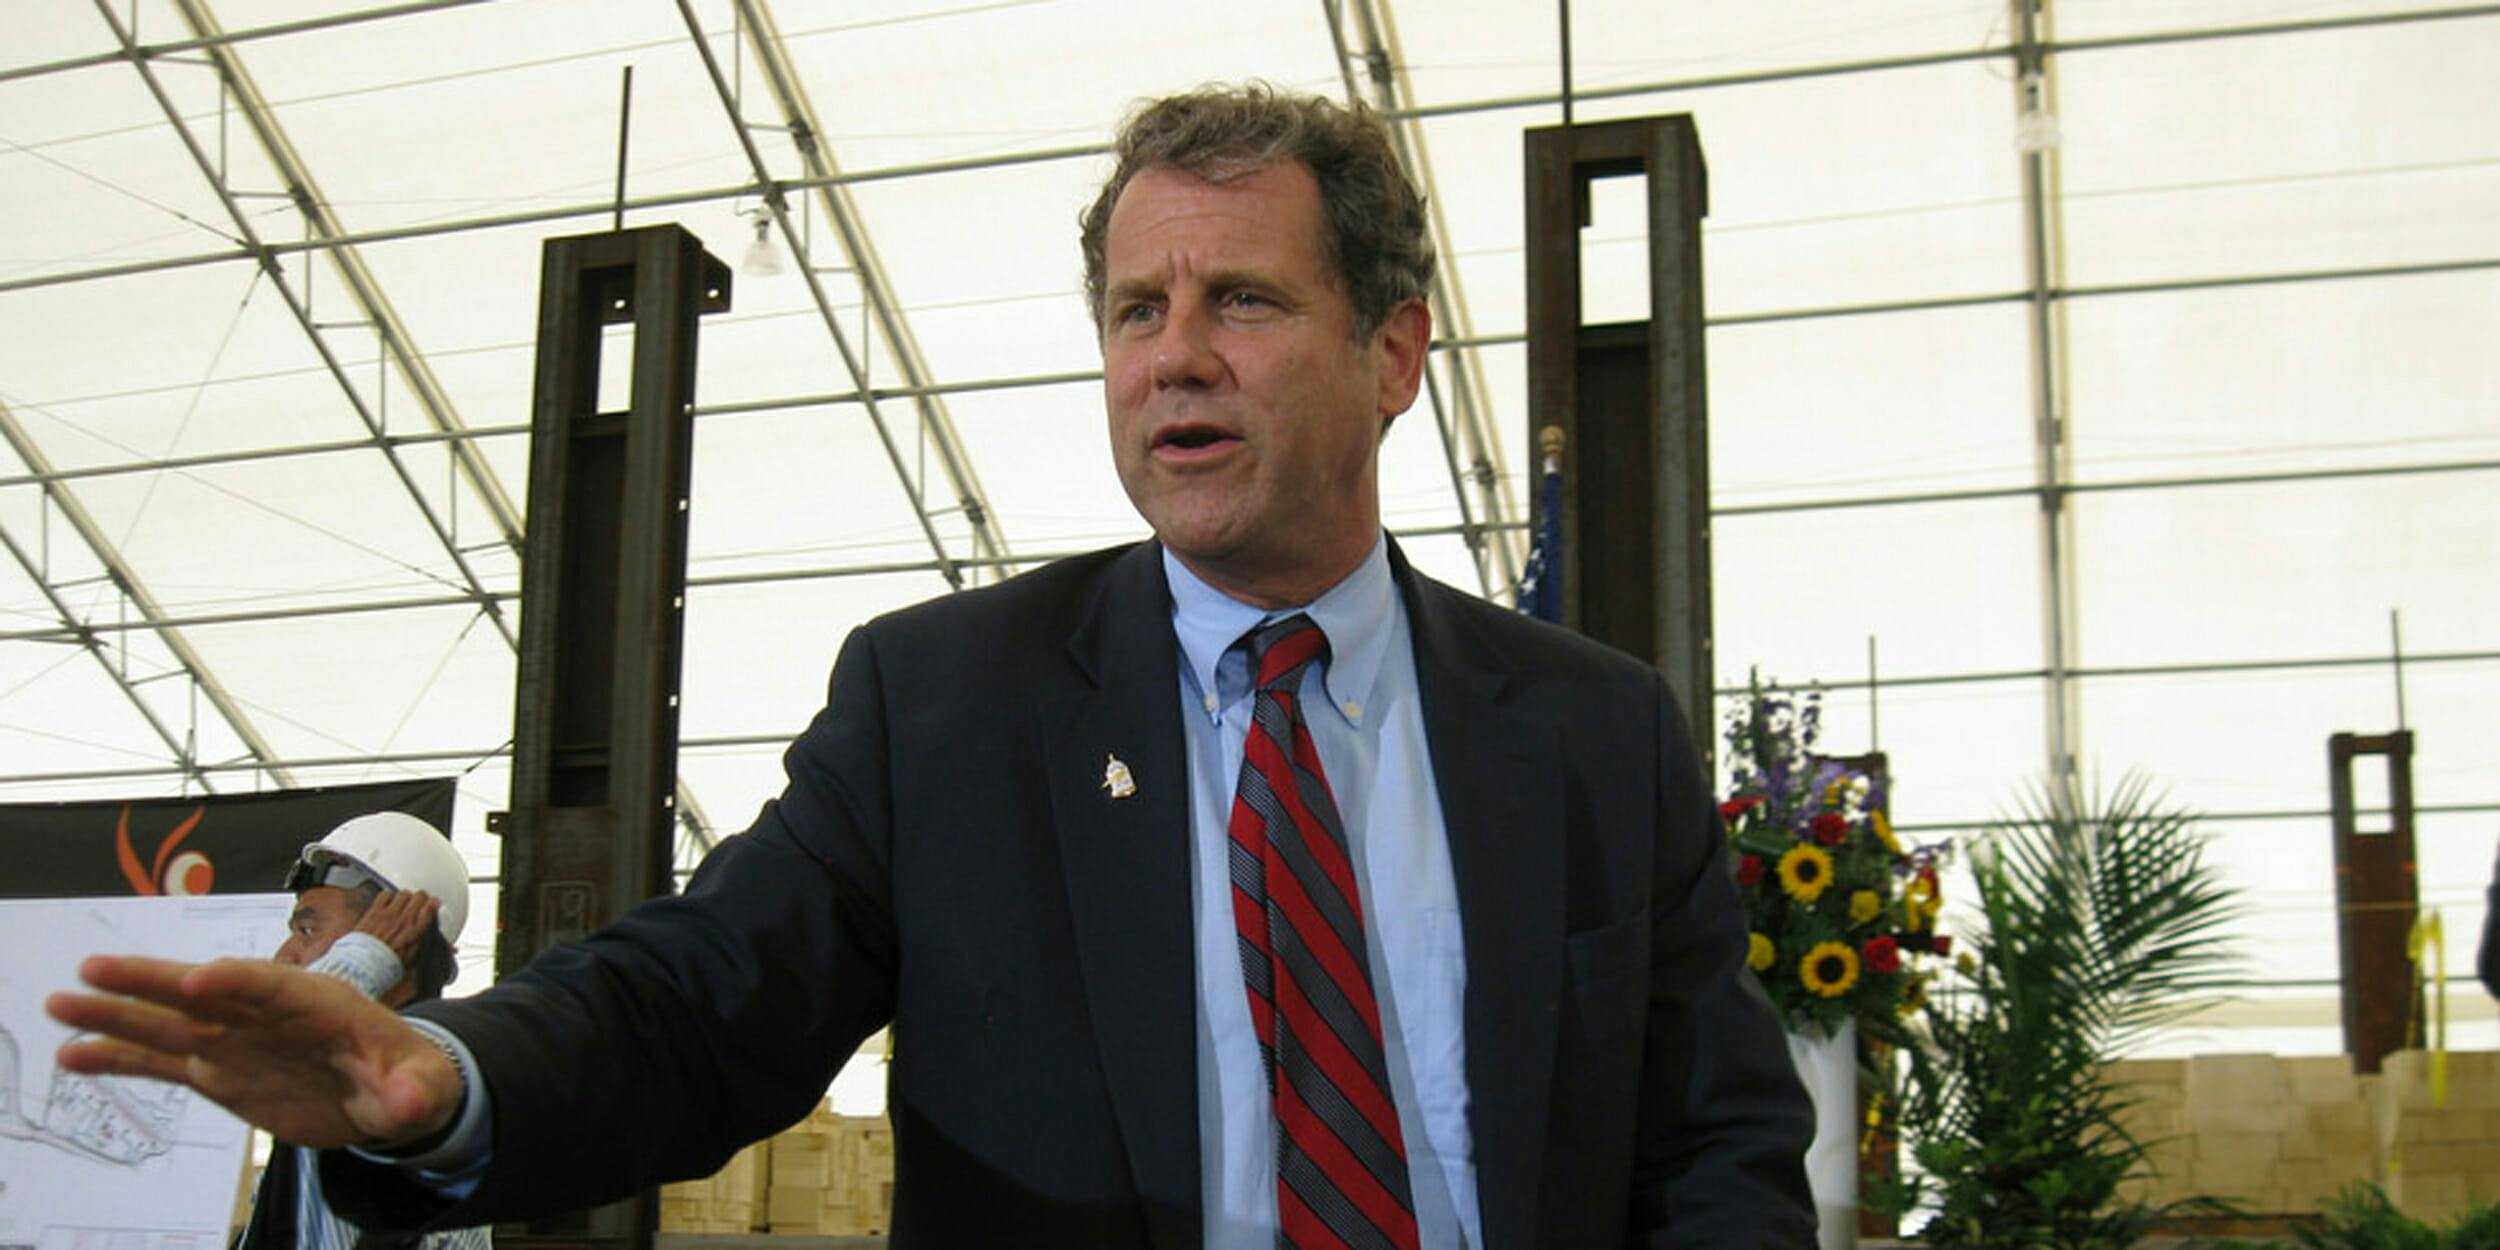 Could Sherrod Brown be a Democratic candidate to face off against Donald Trump in 2020?